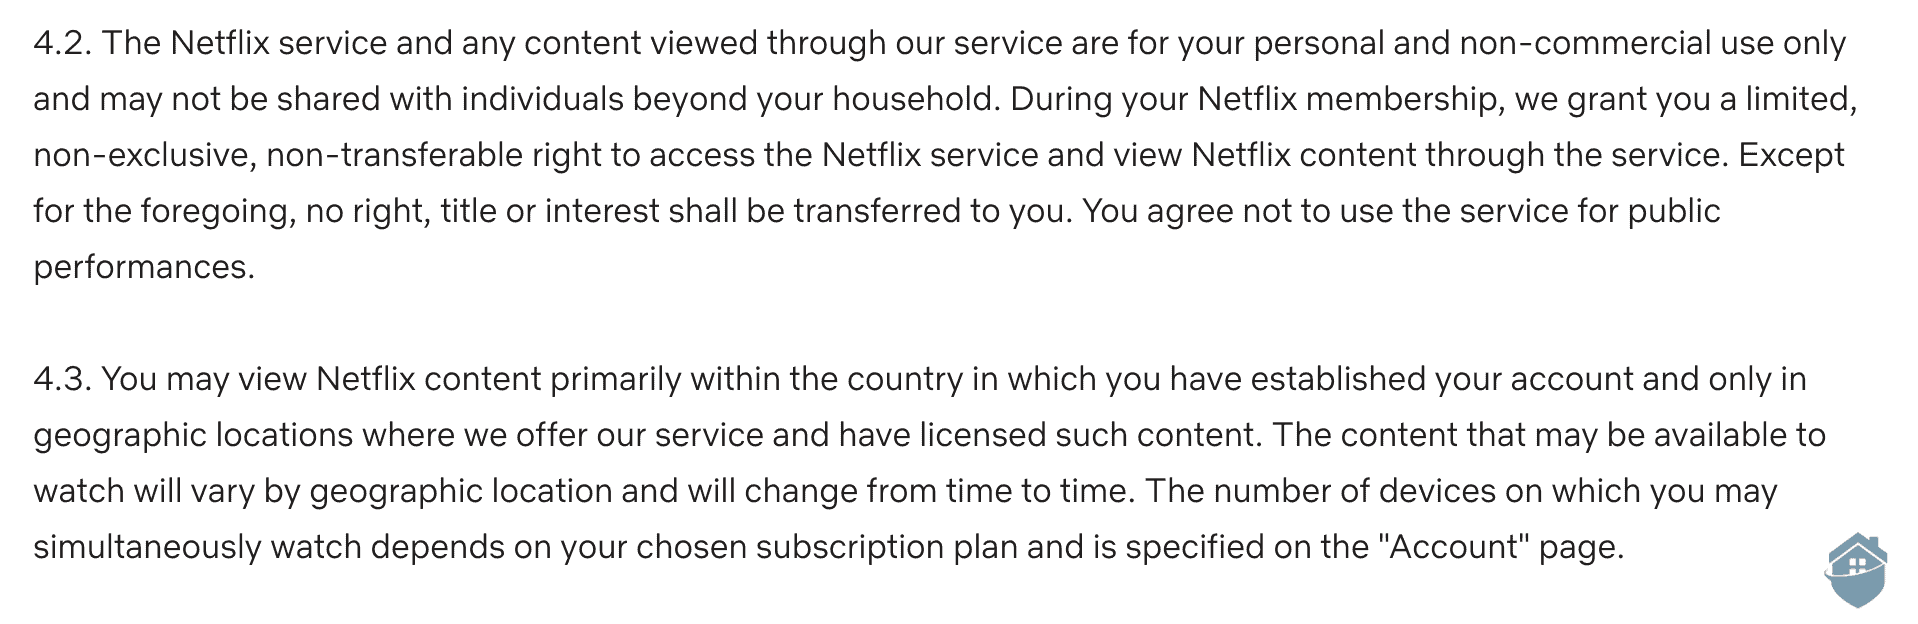 Netflix terms of service